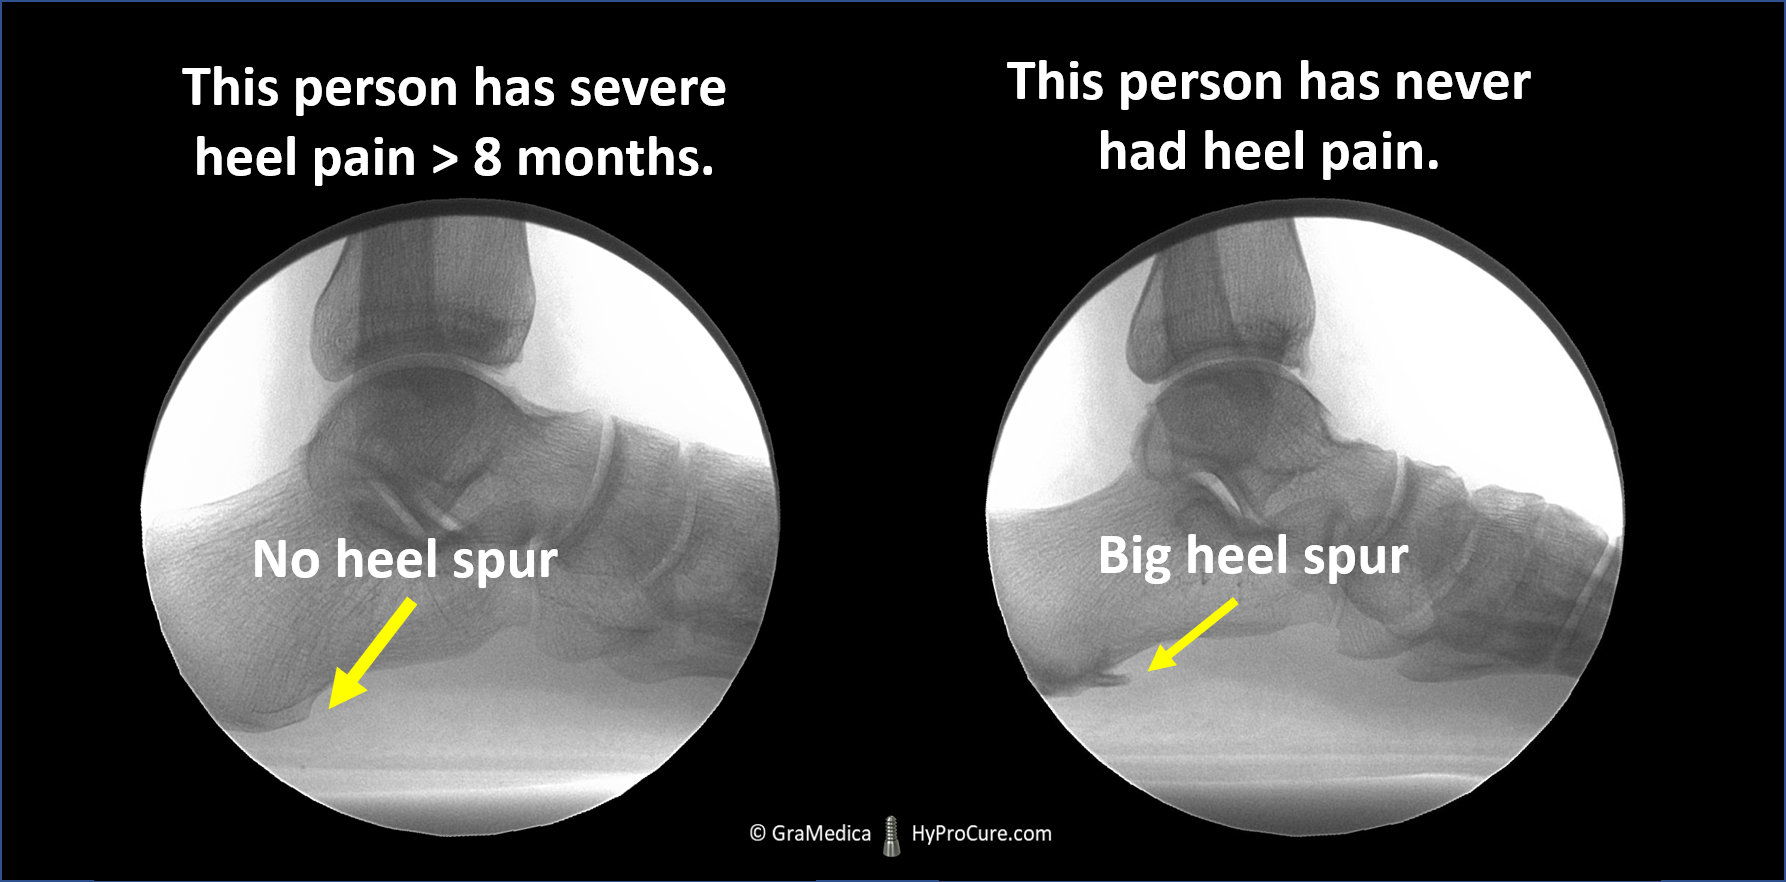 Foot x-ray showing no heel spur and big heel spur